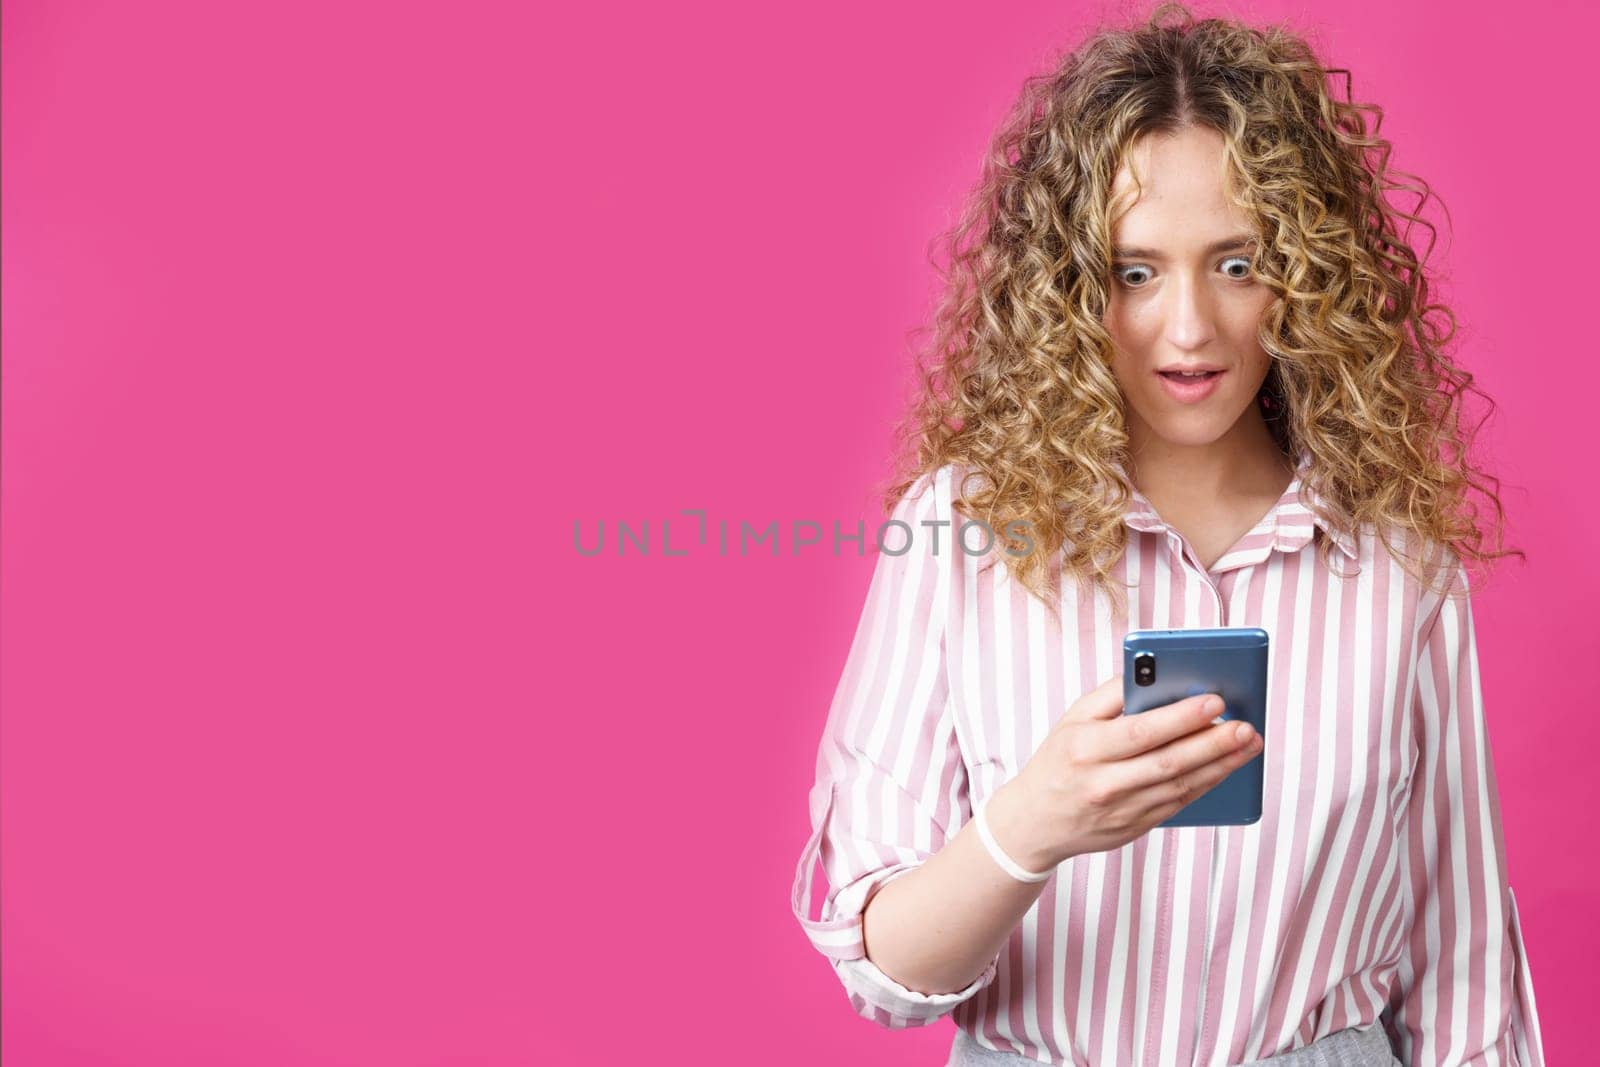 A fashionable woman in a striped shirt, holds a mobile phone, gasps in surprise, reads amazing news. by Sd28DimoN_1976